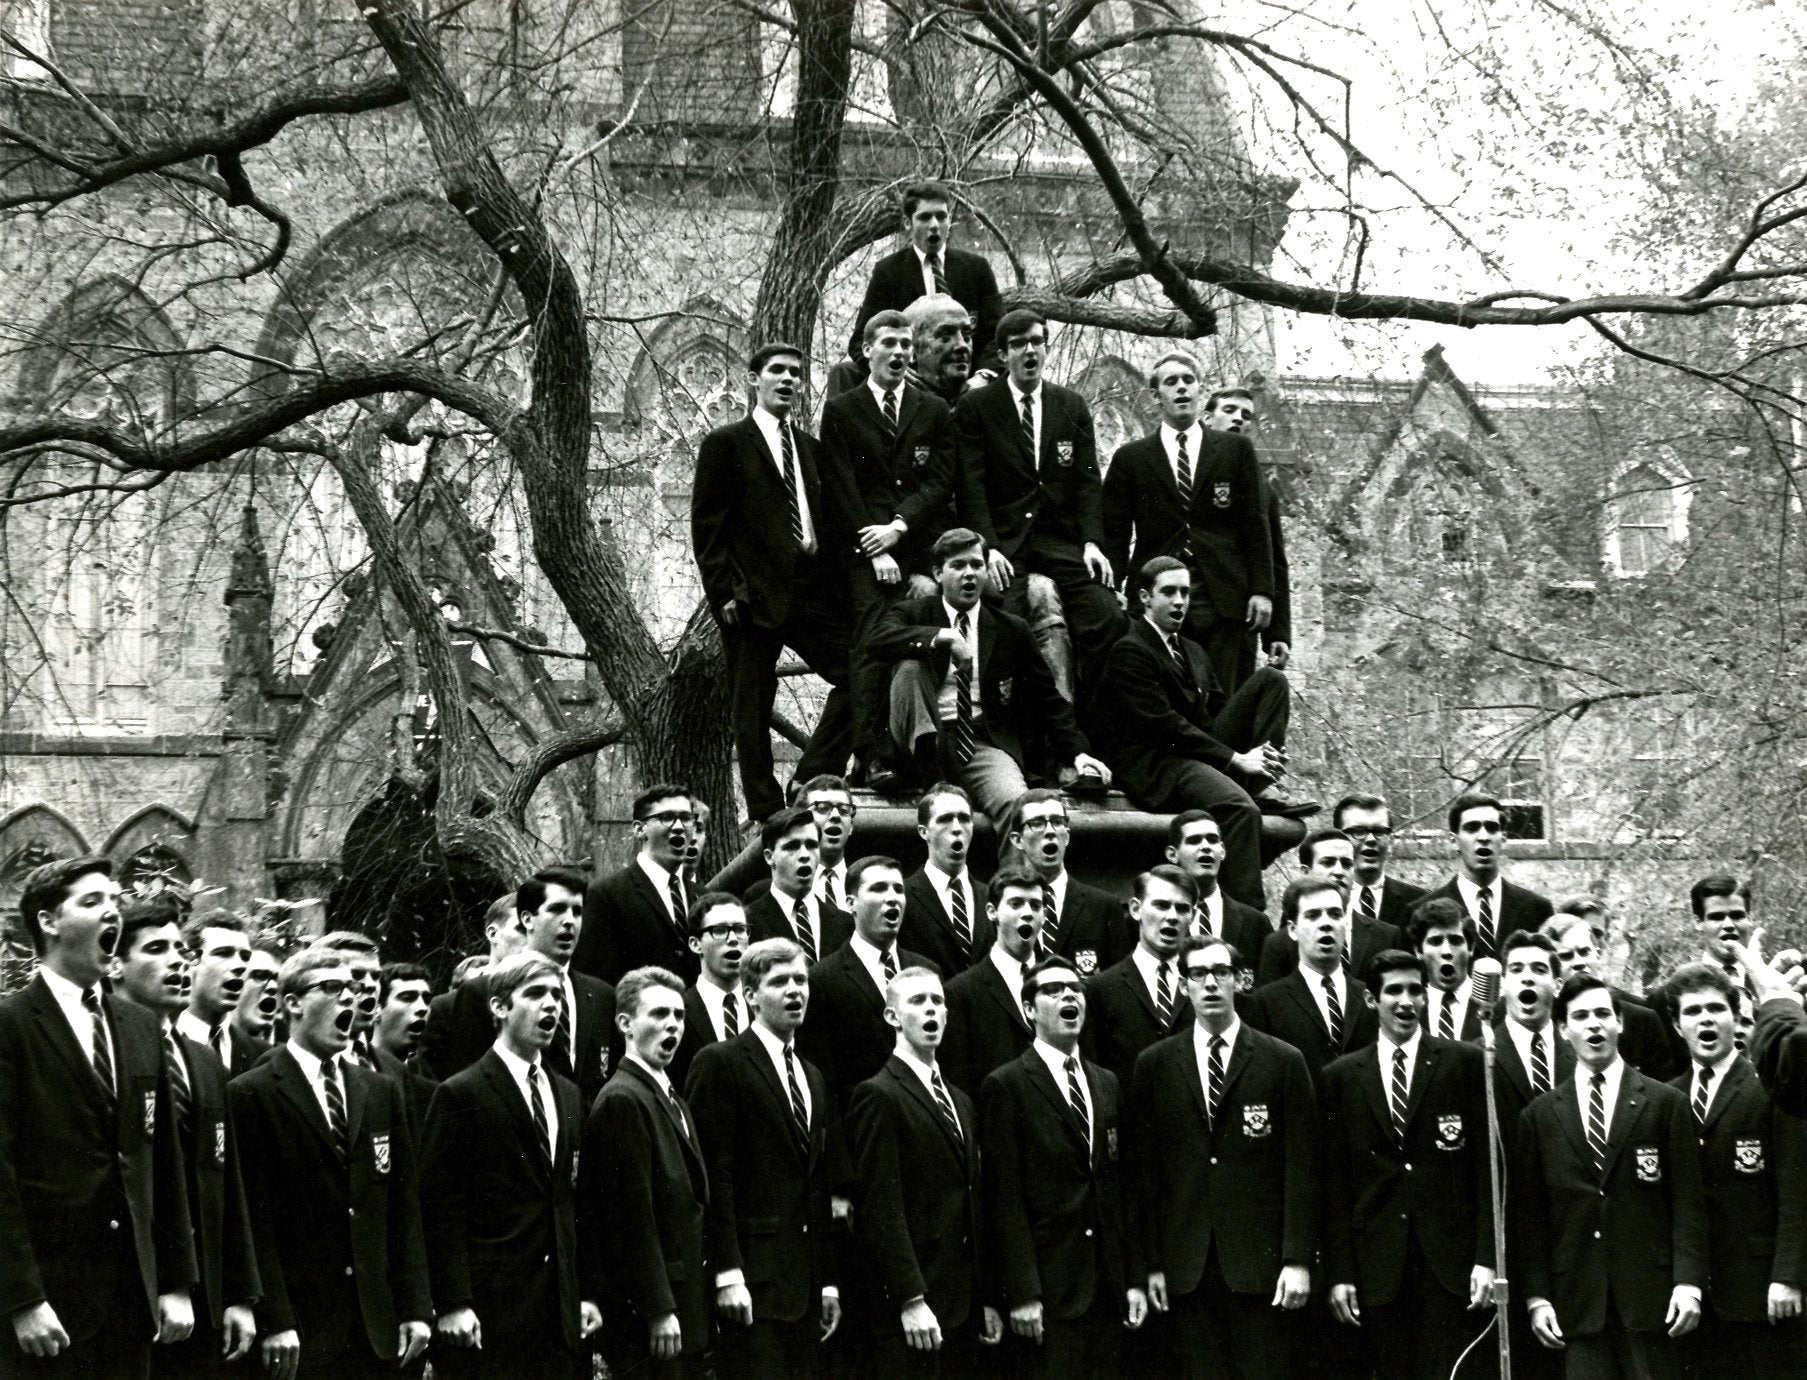 Glee Club in front of College Hall, President